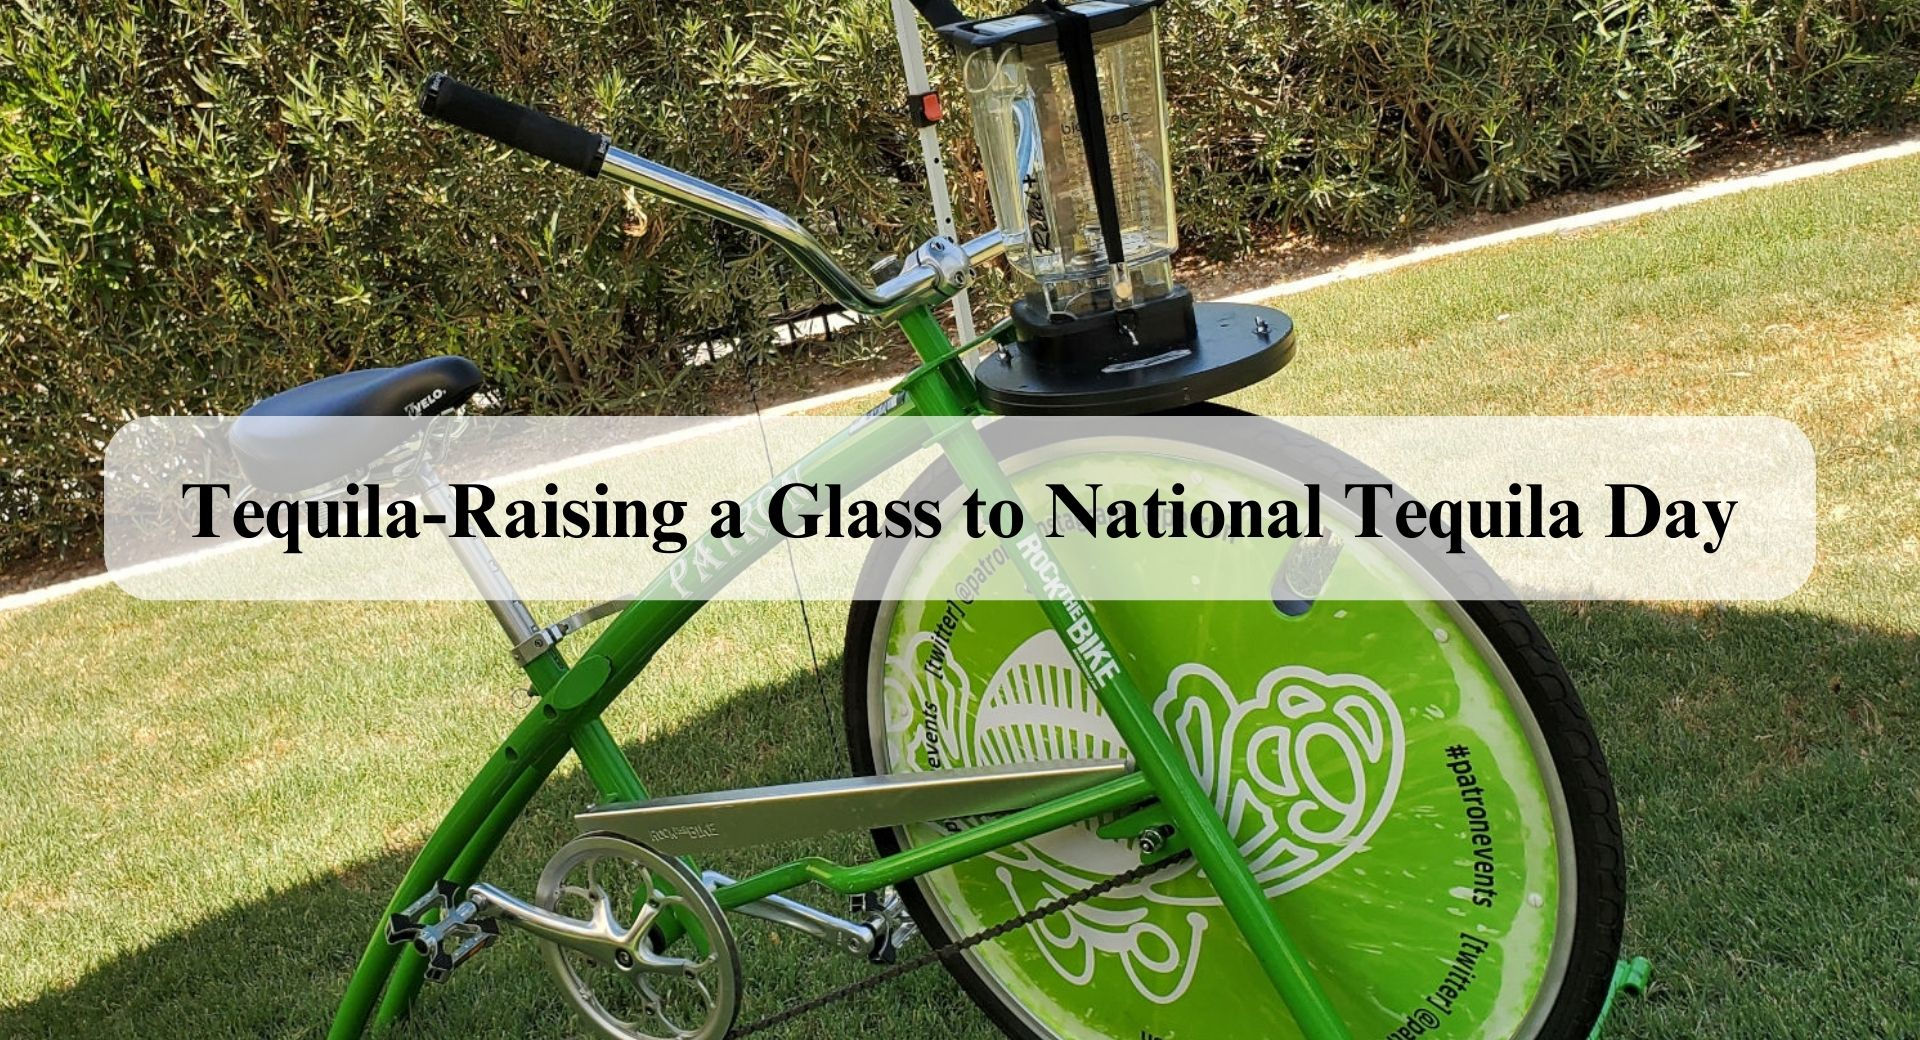 Tequila-Raising a Glass to National Tequila Day